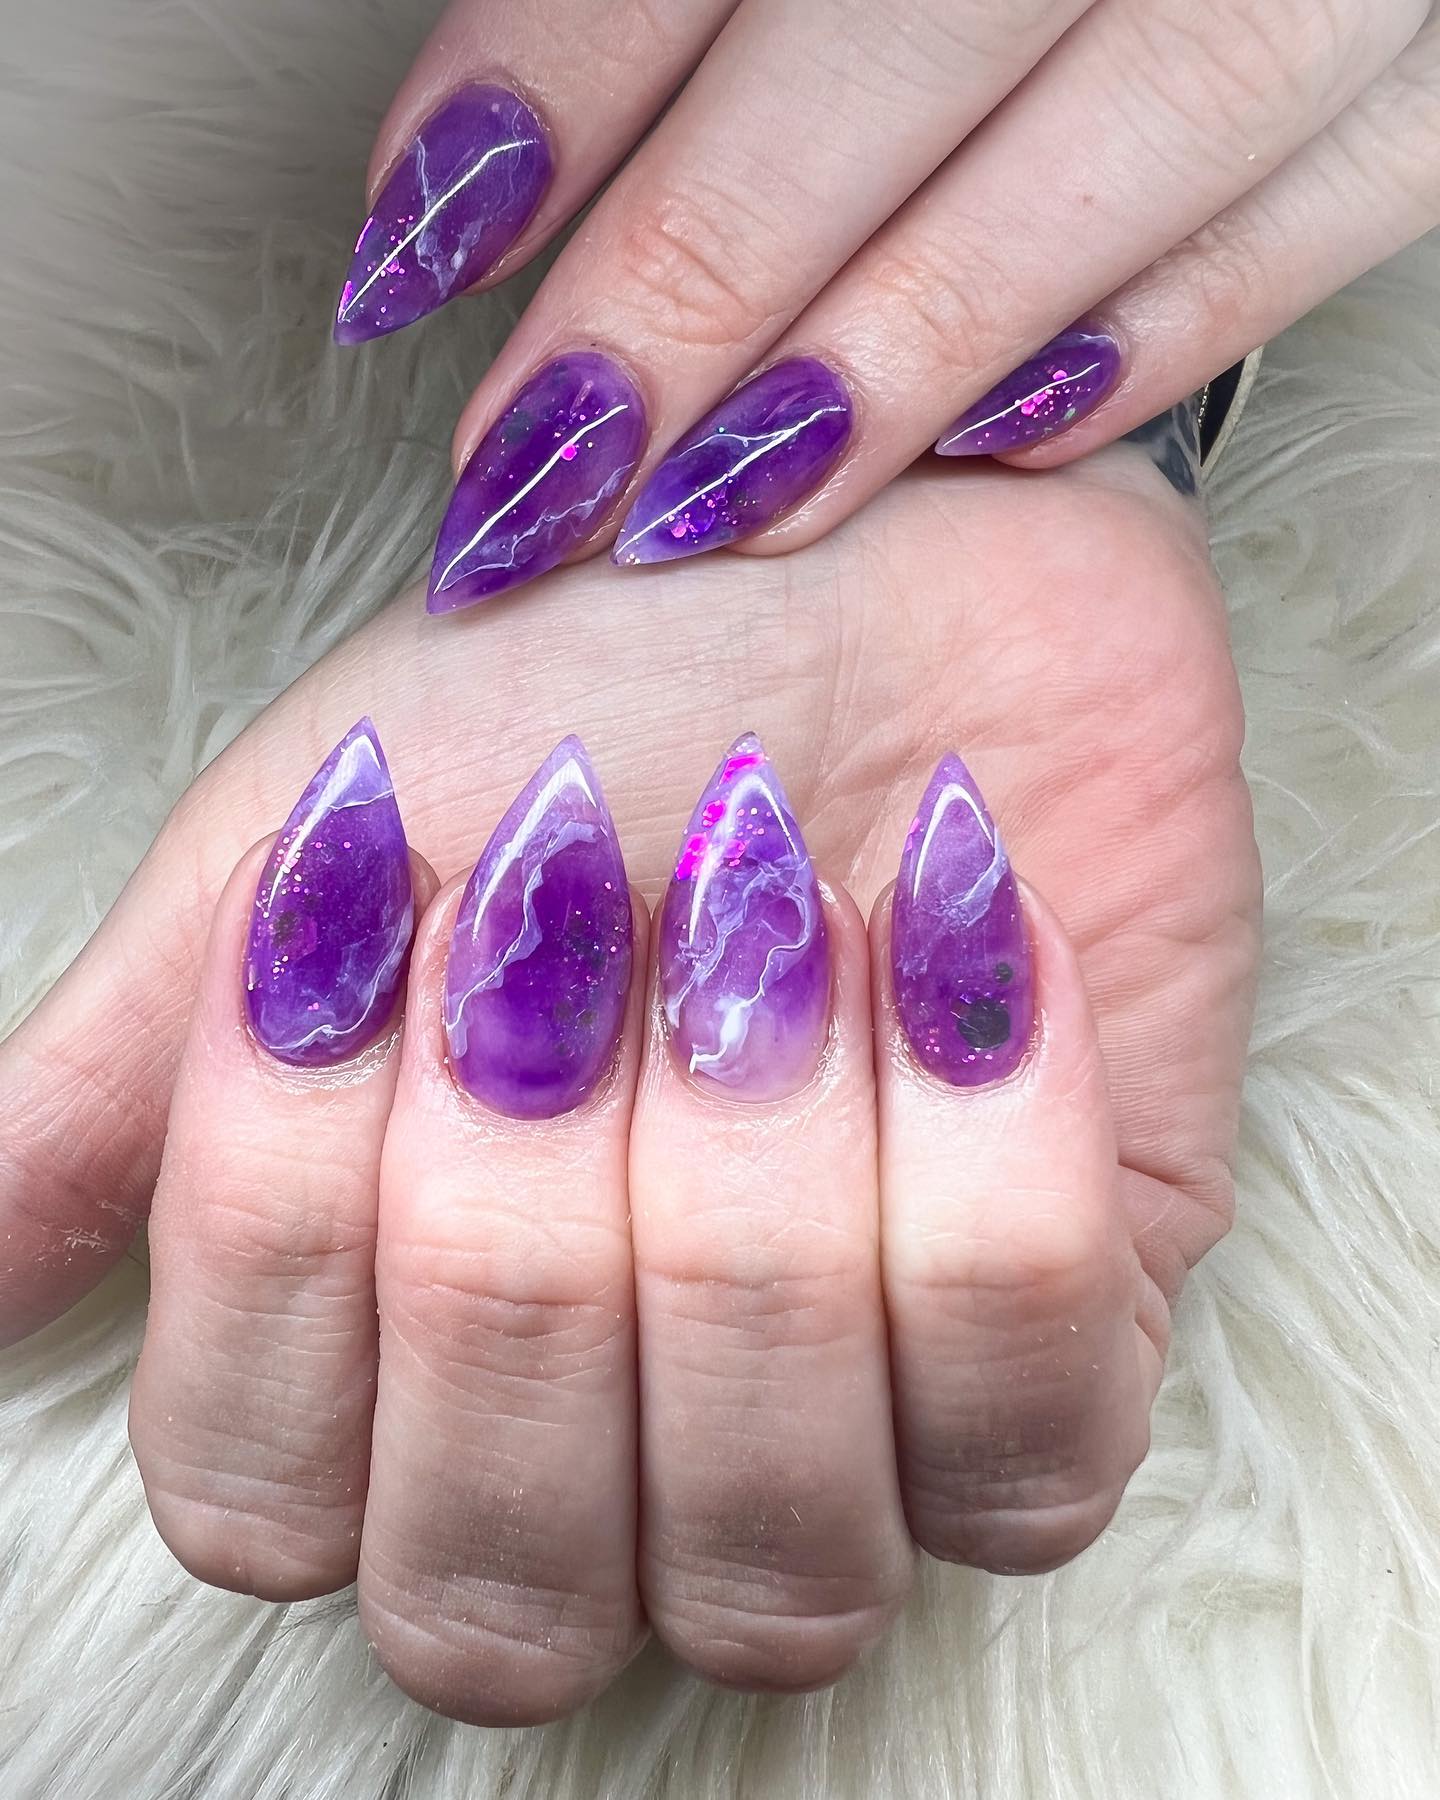 This jelly stiletto nails will take your nails to a new level. The purple color looks amazing.